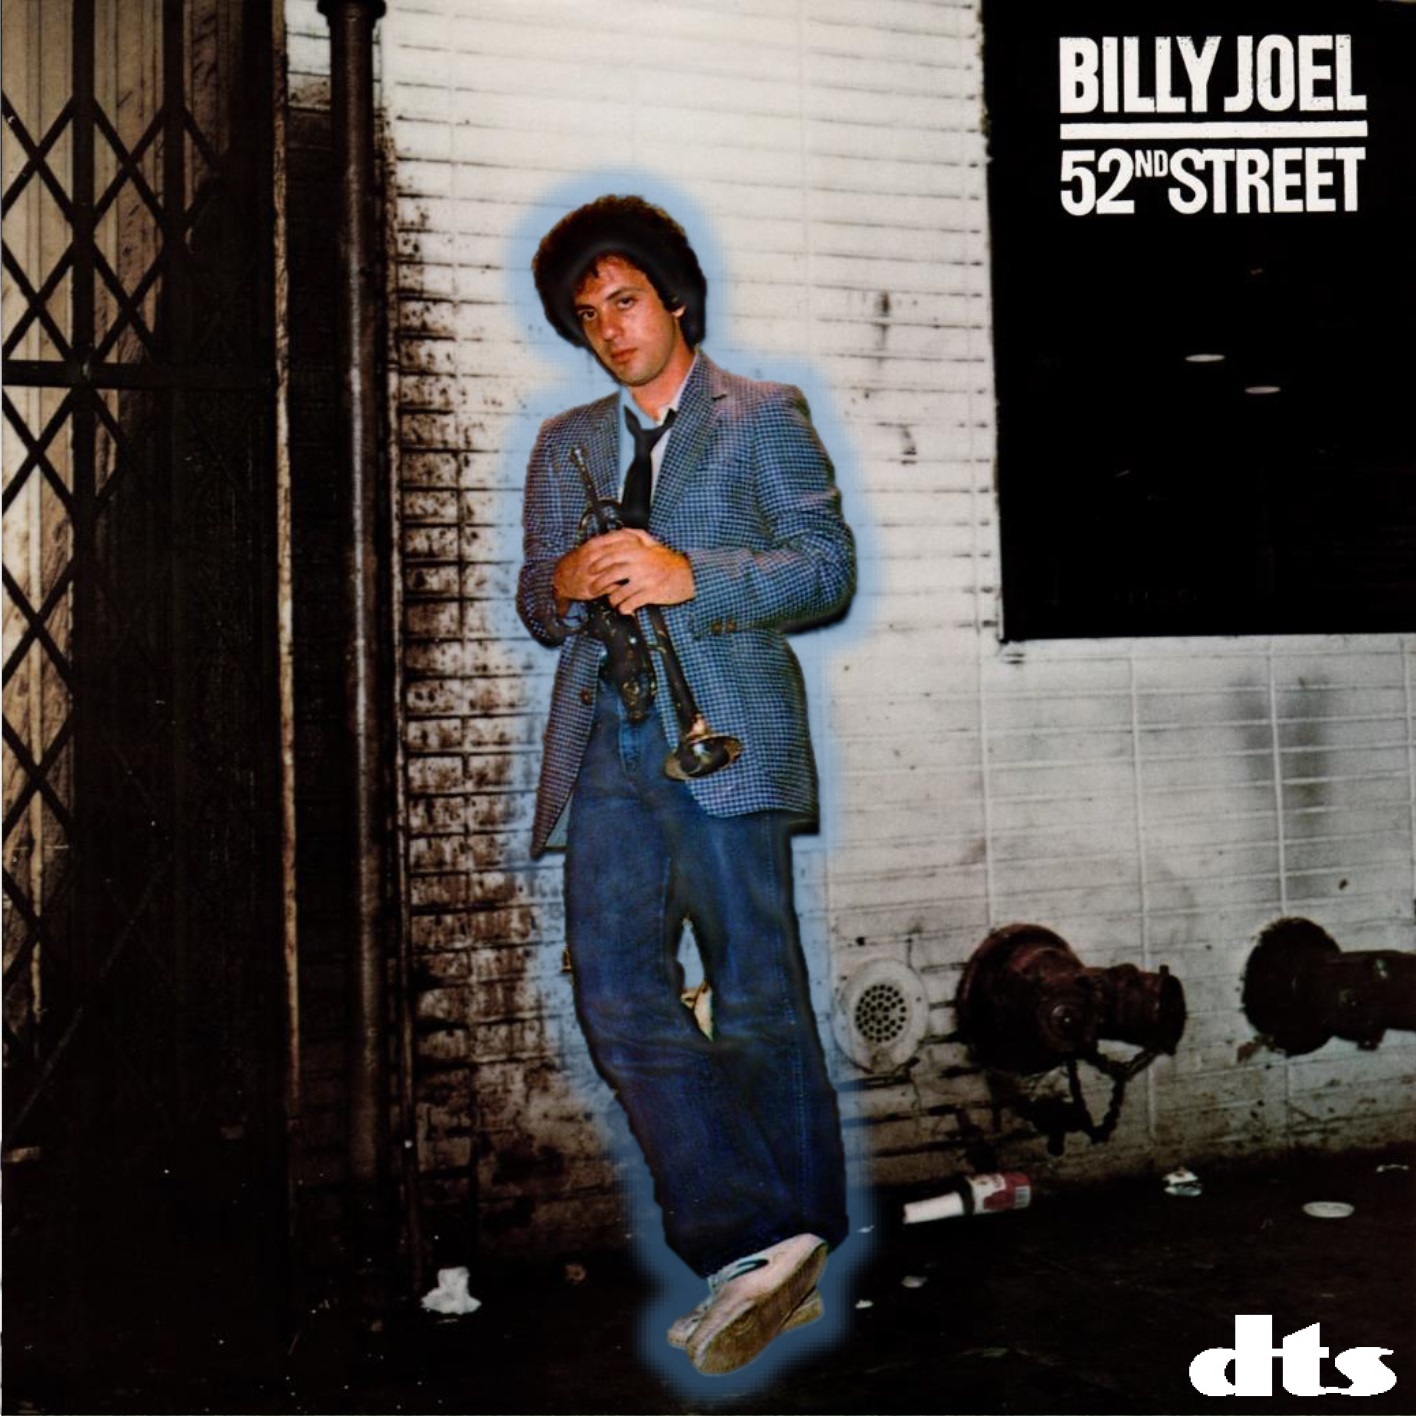 Primary image for Billy Joel - 52nd Street - [DTS-CD] 5.1 Surround Mix CD My Life Big Shot Honesty